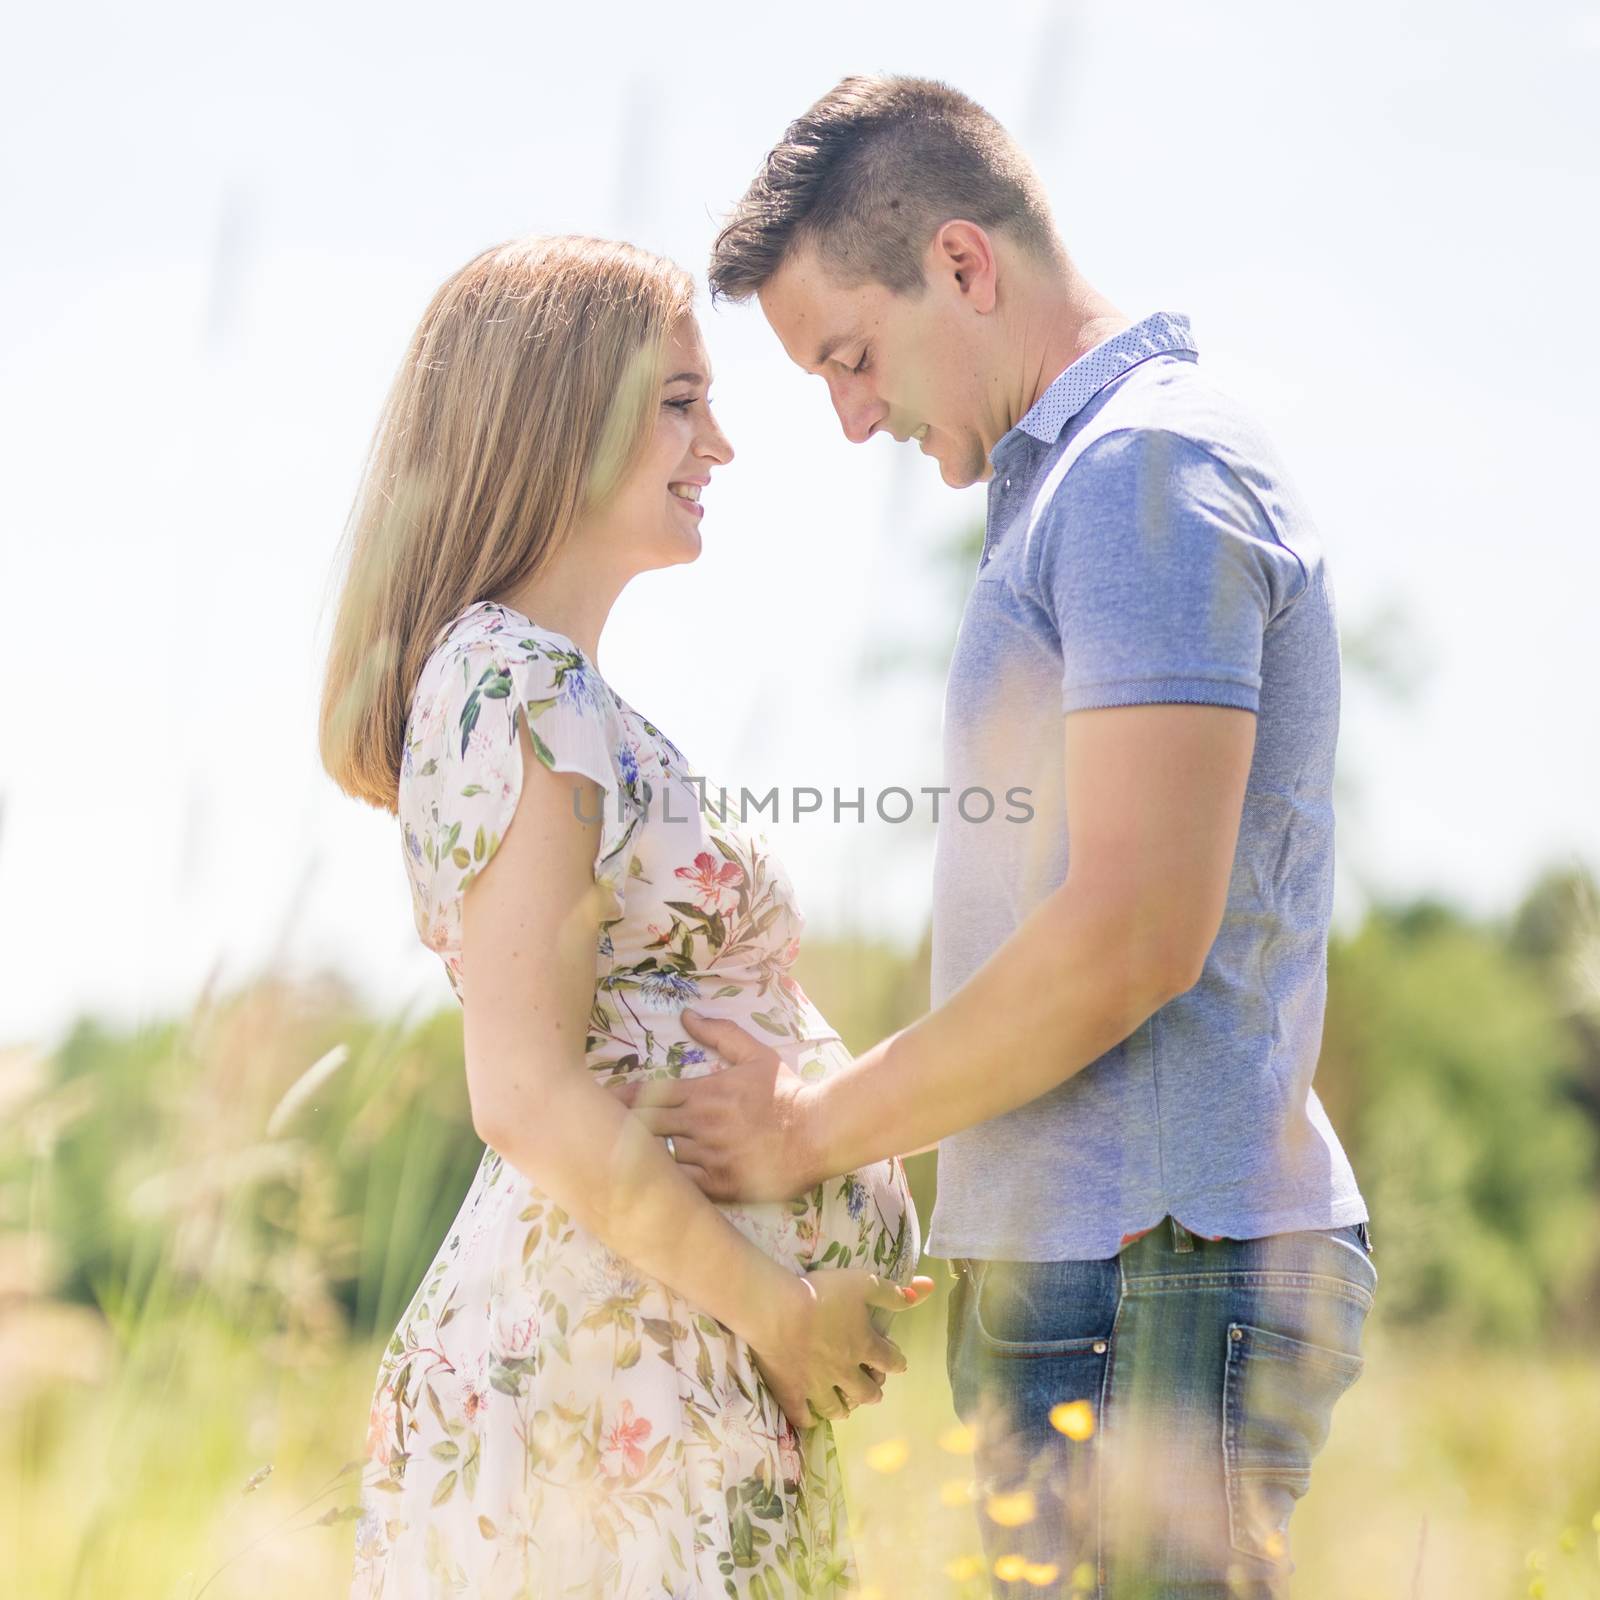 Young happy pregnant couple hugging in nature. Concept of love, relationship, care, marriage, family creation, pregnancy, parenting